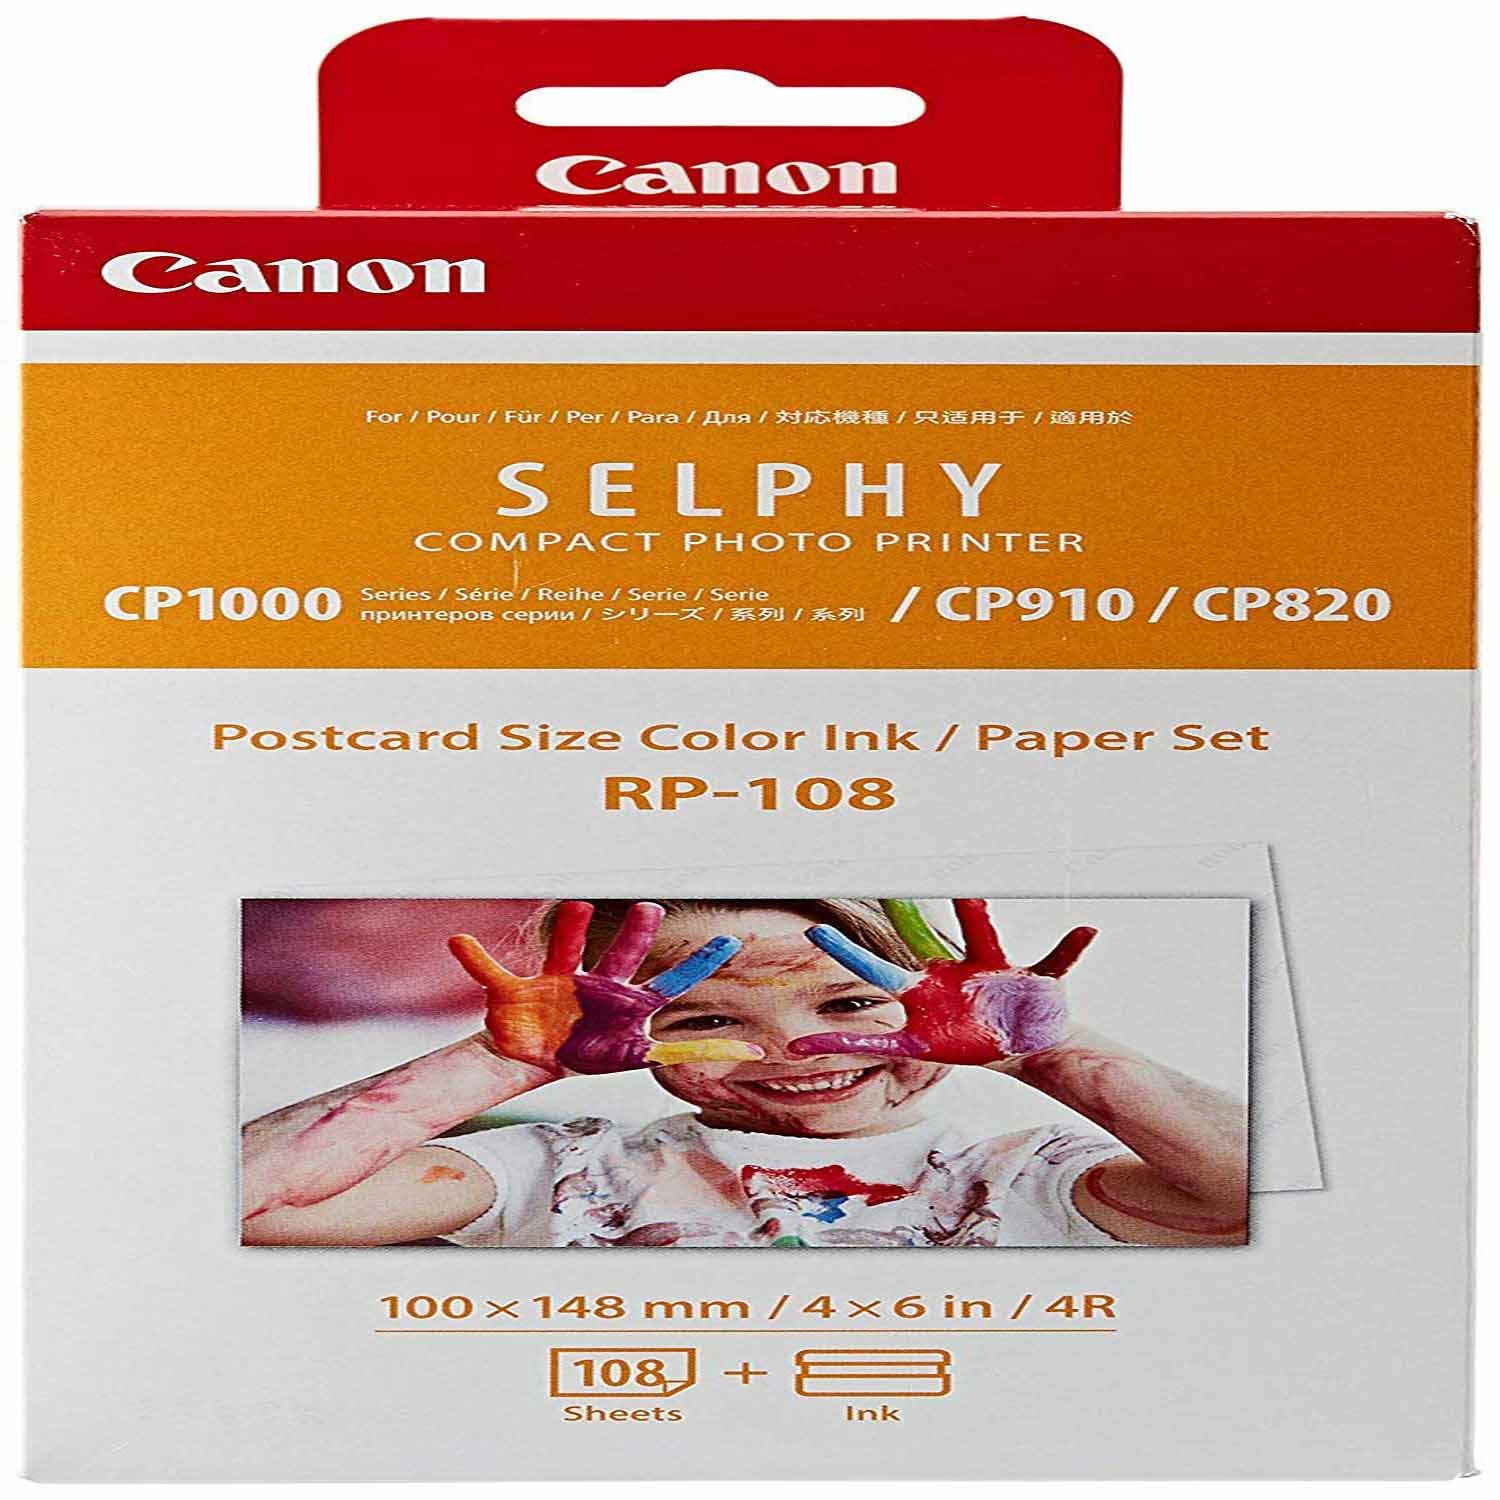 Canon PG-210 XL Pigment Ink Cartridge, Black - image 1 of 2